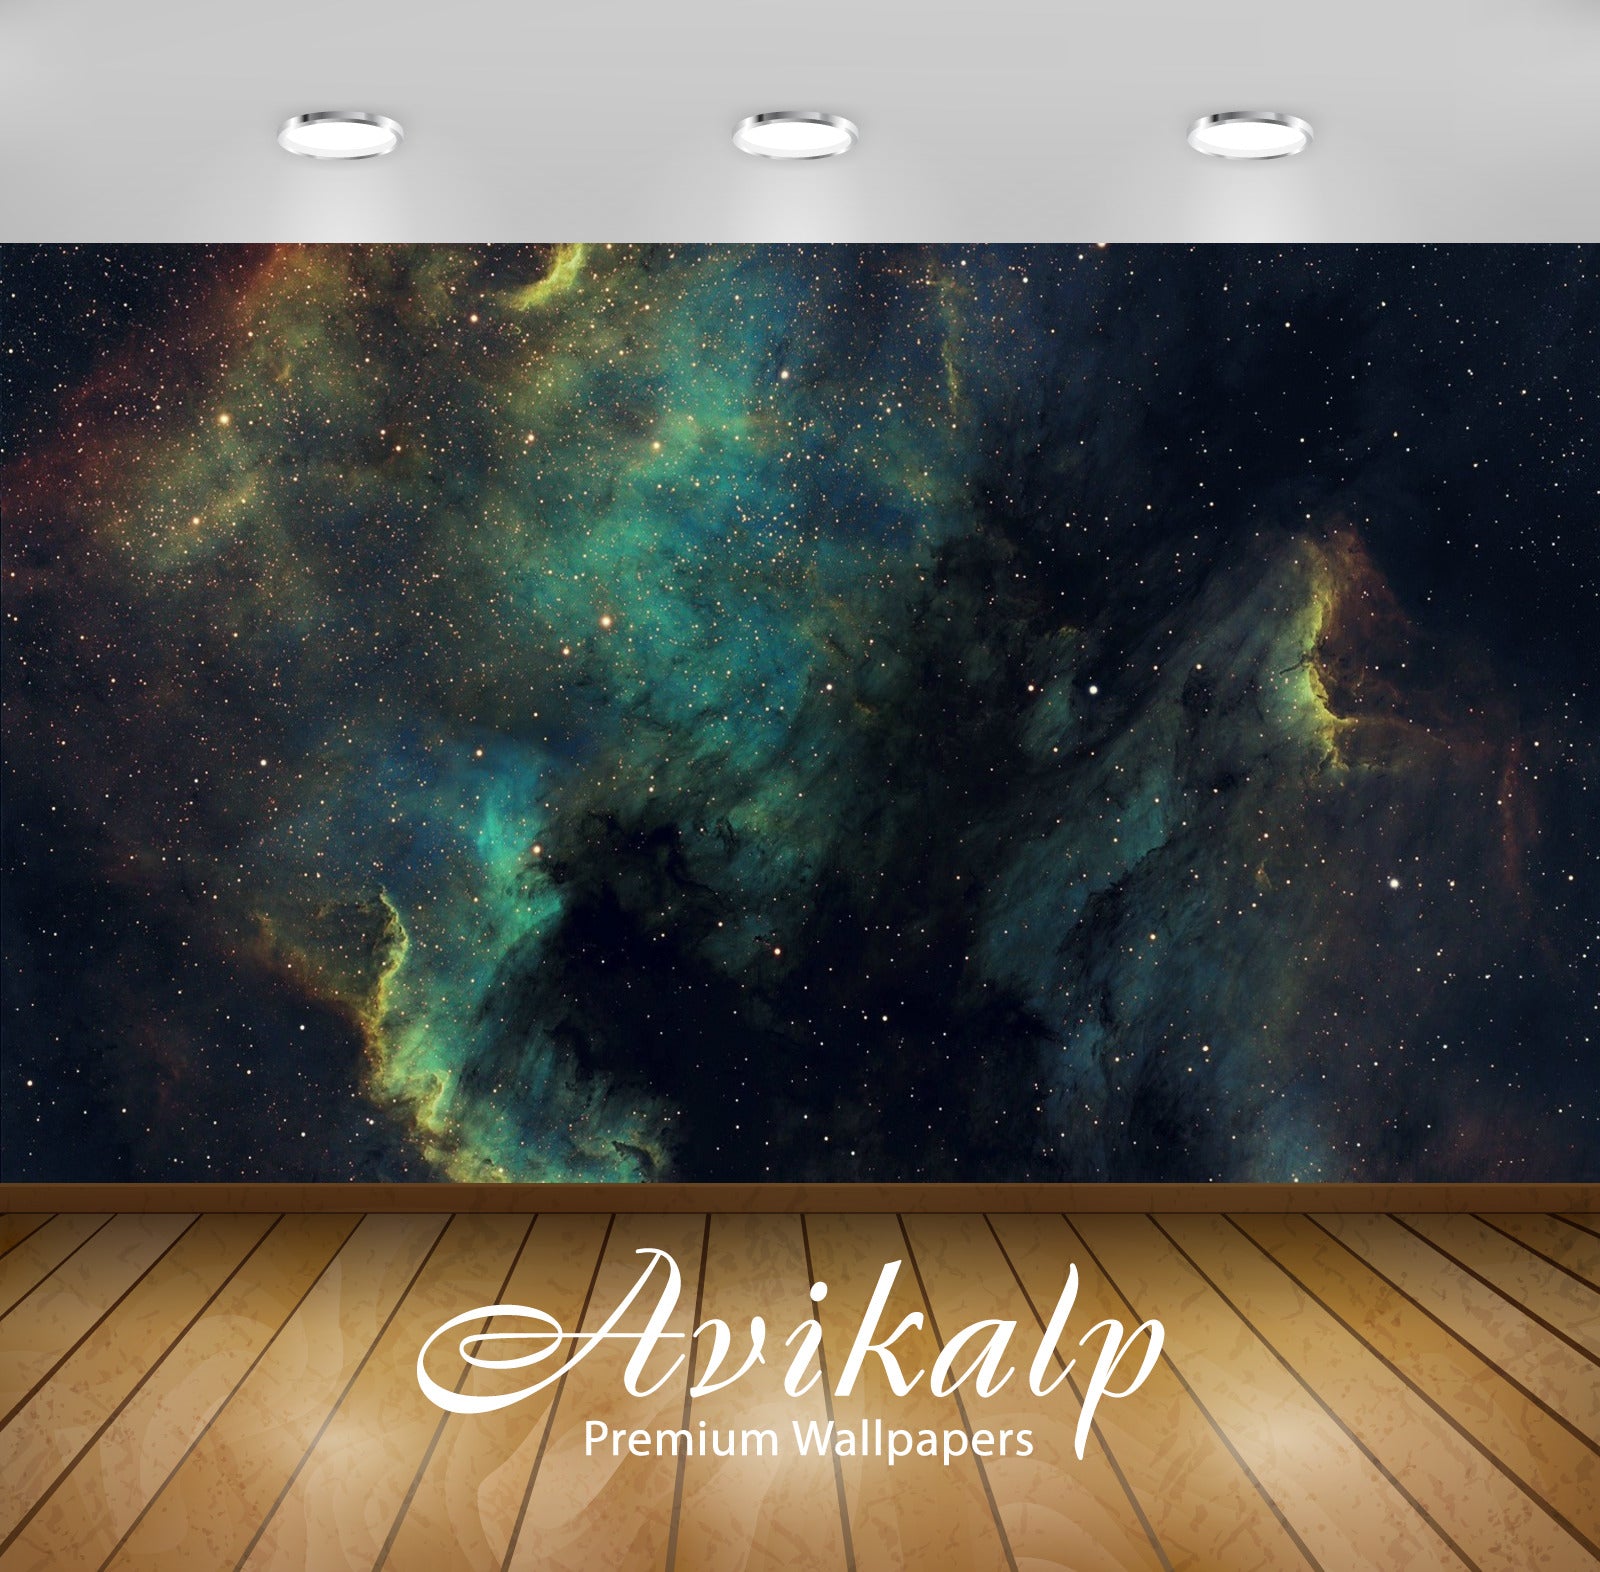 Avikalp Exclusive Awi1351 Deep Sky View Full HD Wallpapers for Living room, Hall, Kids Room, Kitchen